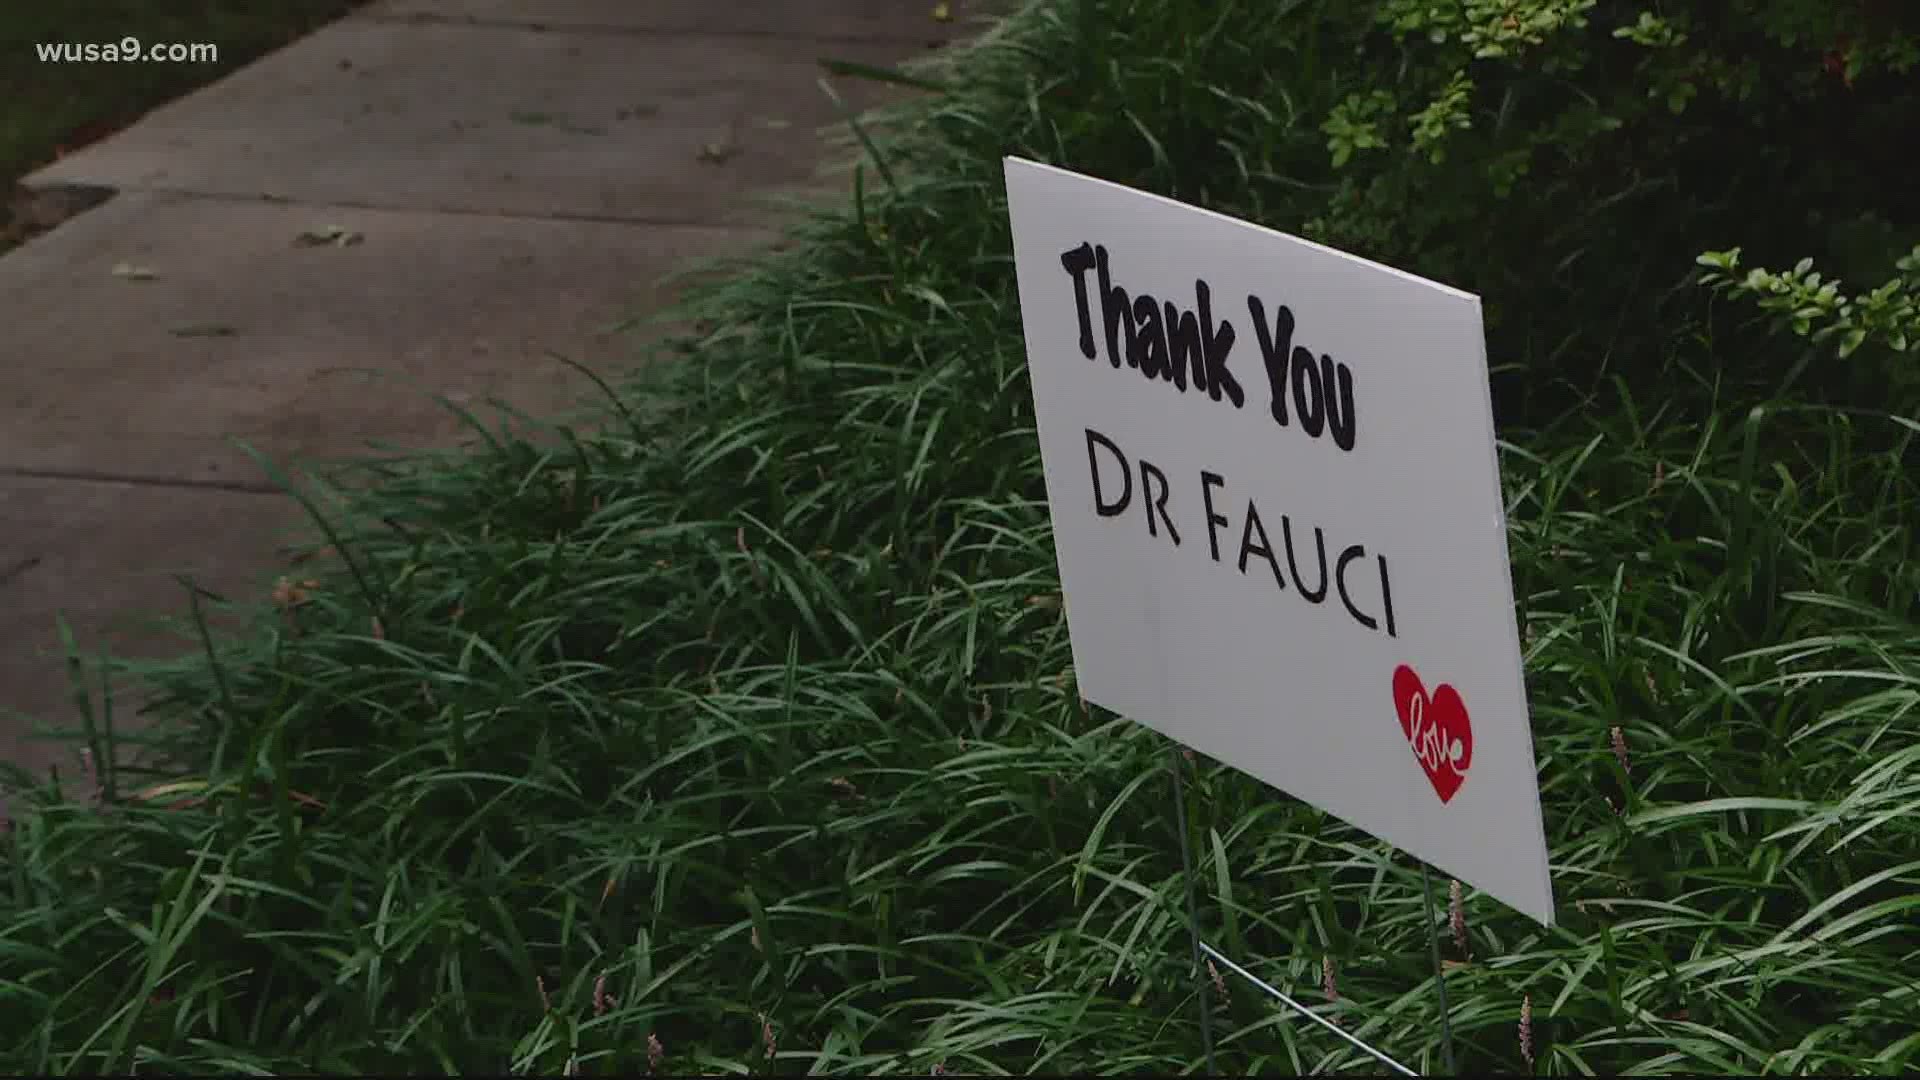 Neighbors noticed that that signs thanking Dr. Fauci, along with signs supporting Black lives were removed from their yards.